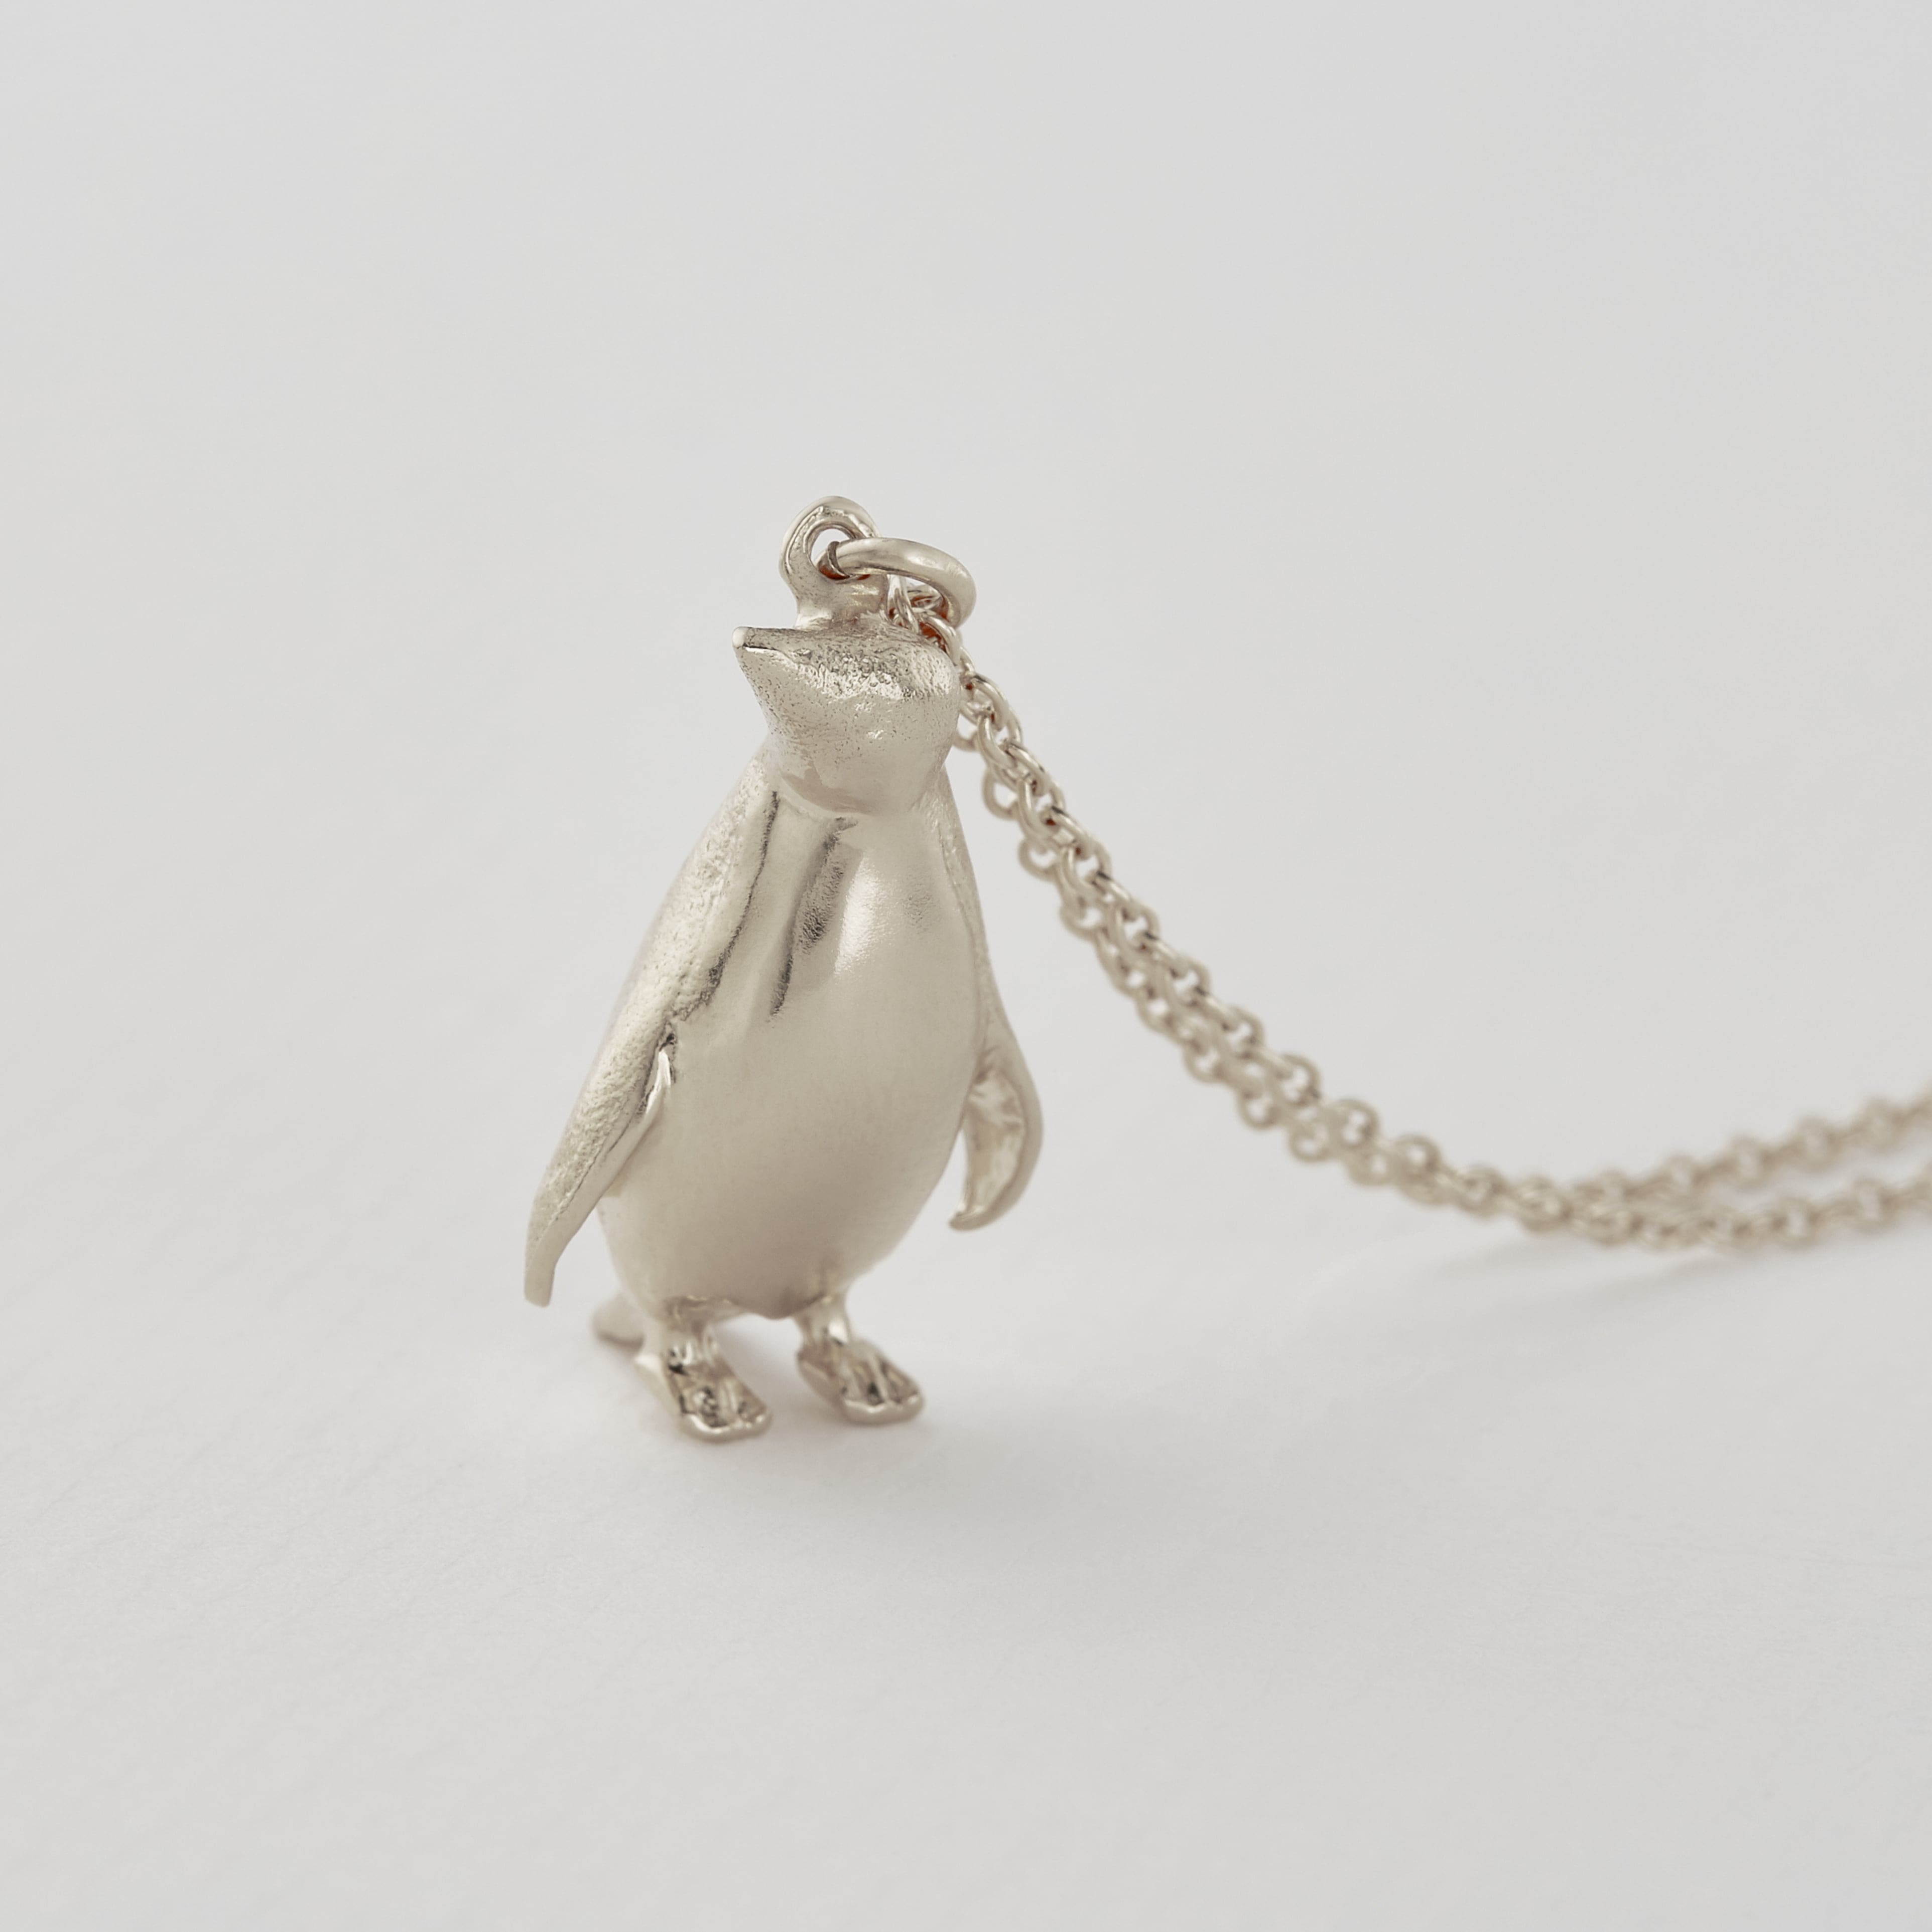 Ingenious rose gold necklace with pave penguin pendant - Ingenious from  Ingenious Jewellery UK